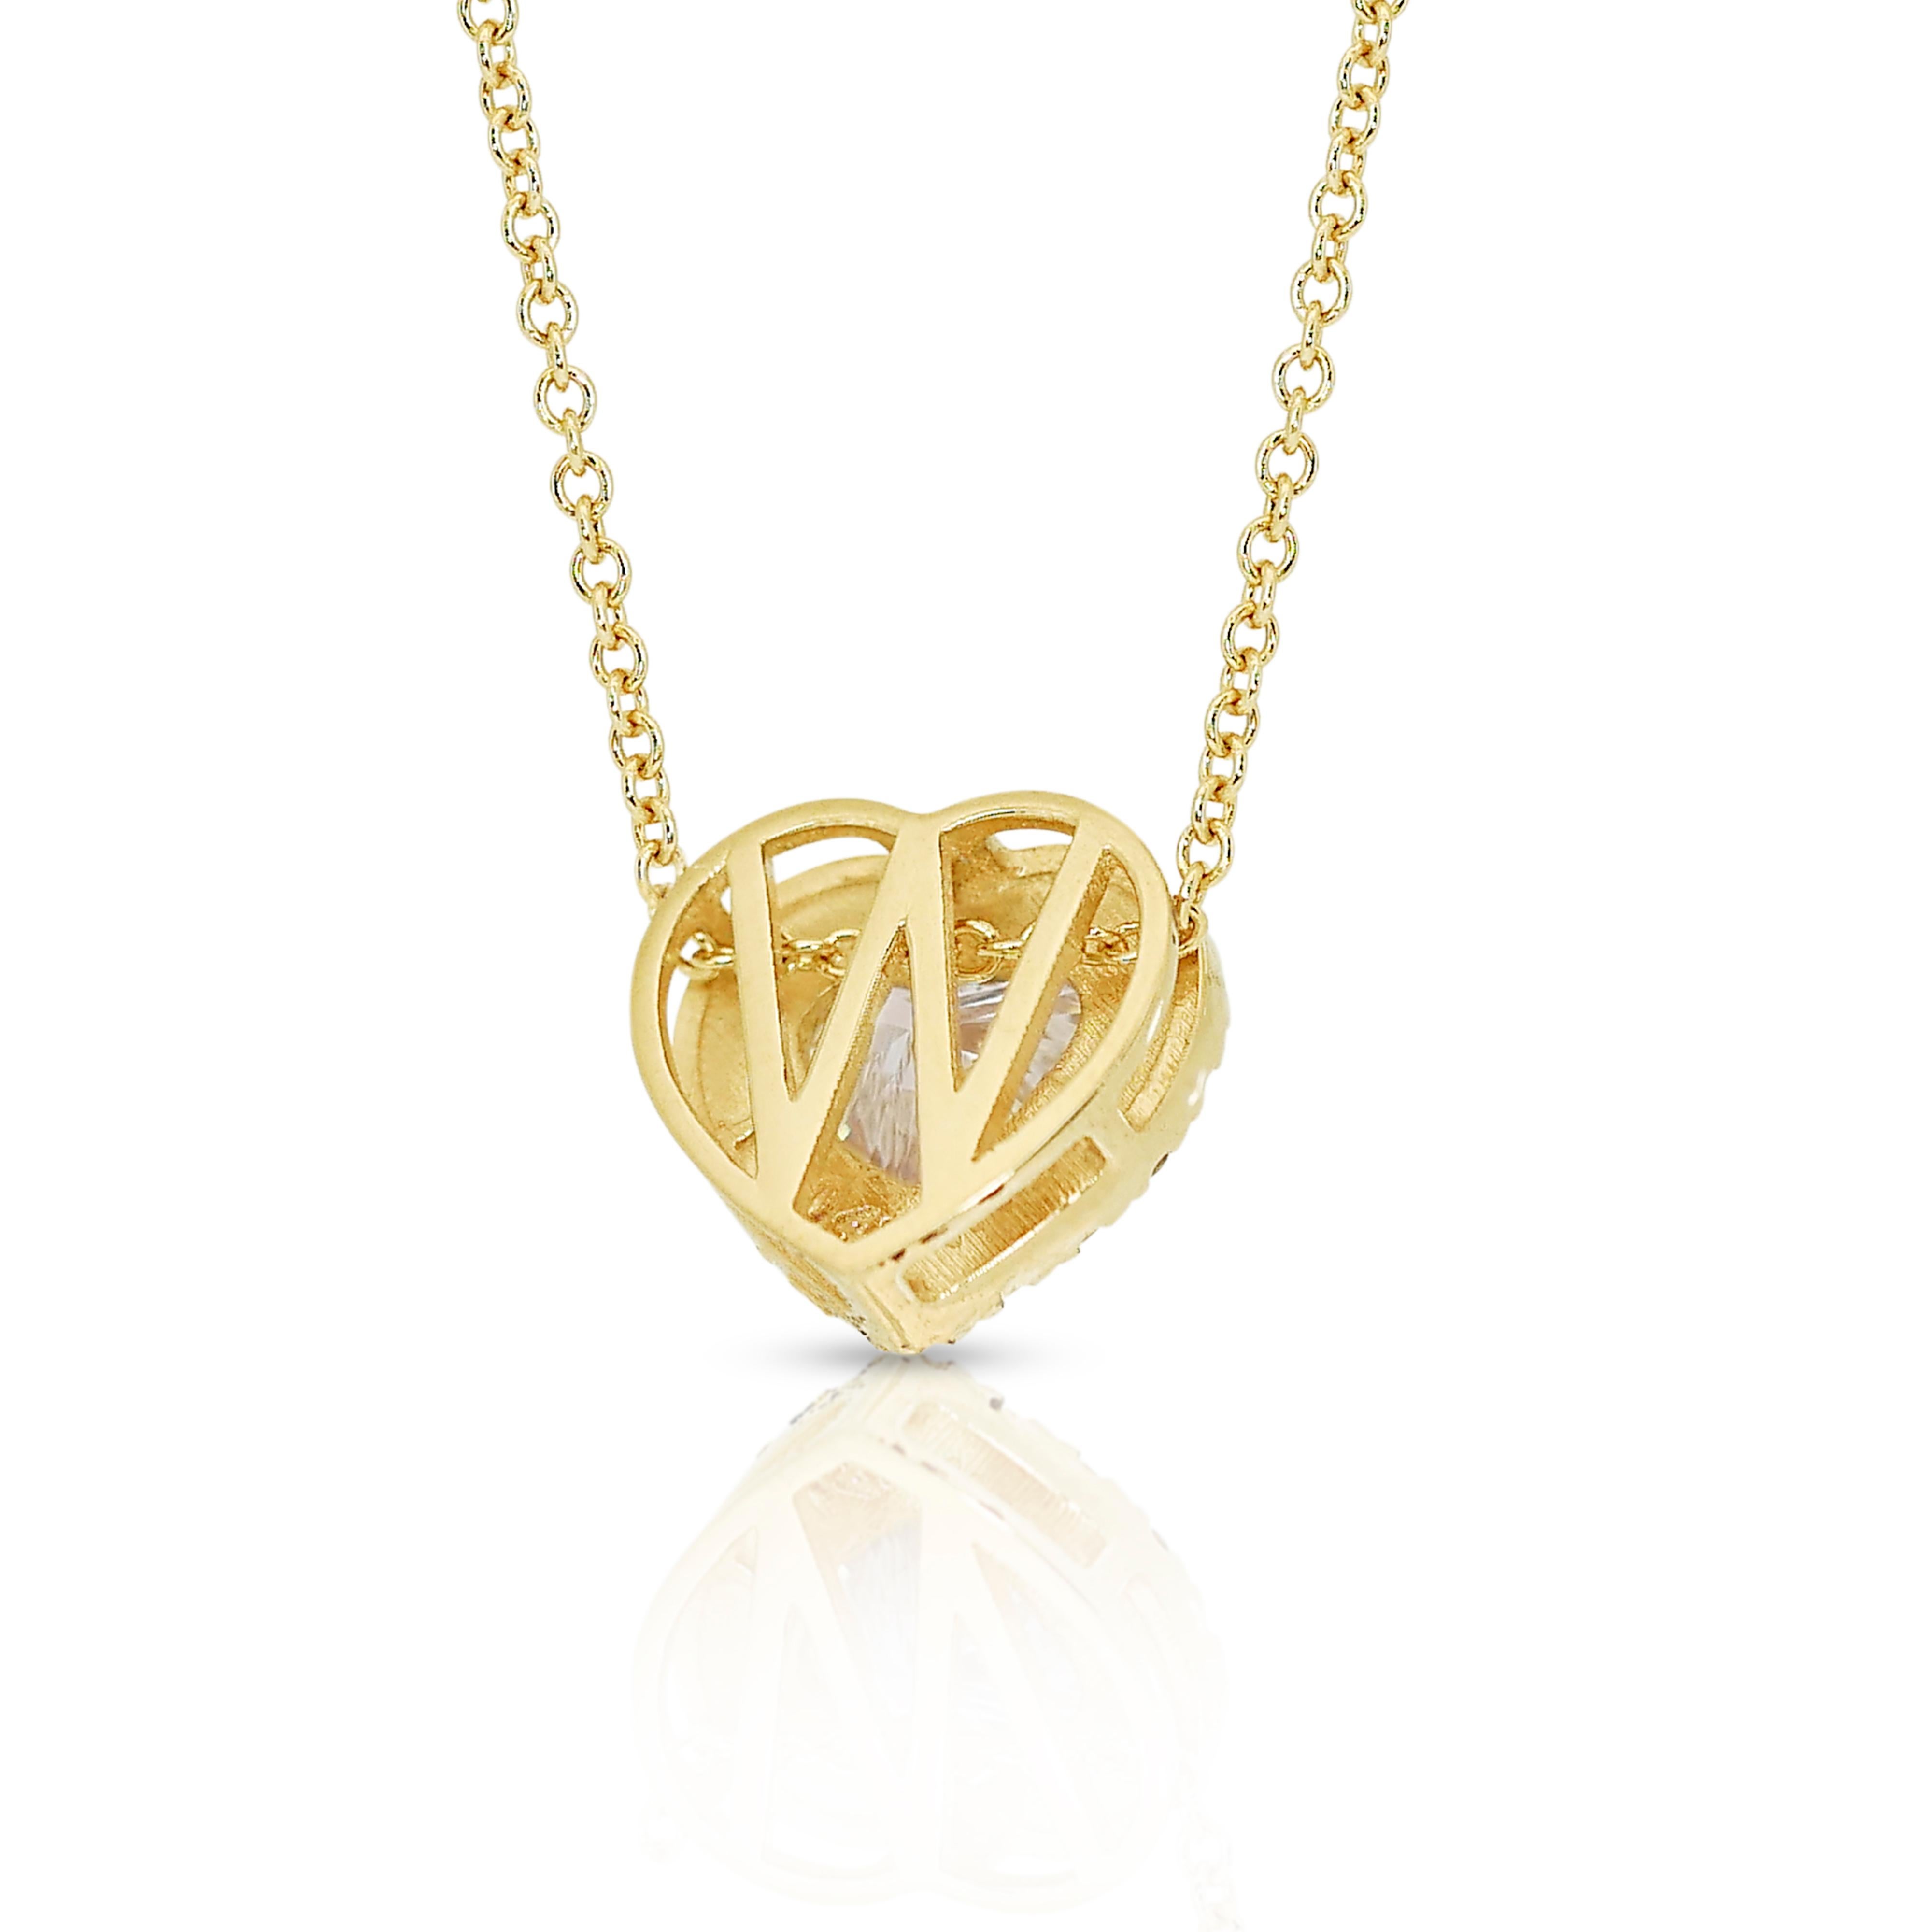 Brilliant 1.28ct Diamonds Halo Necklace in 18k Yellow Gold - IGI Certified For Sale 2